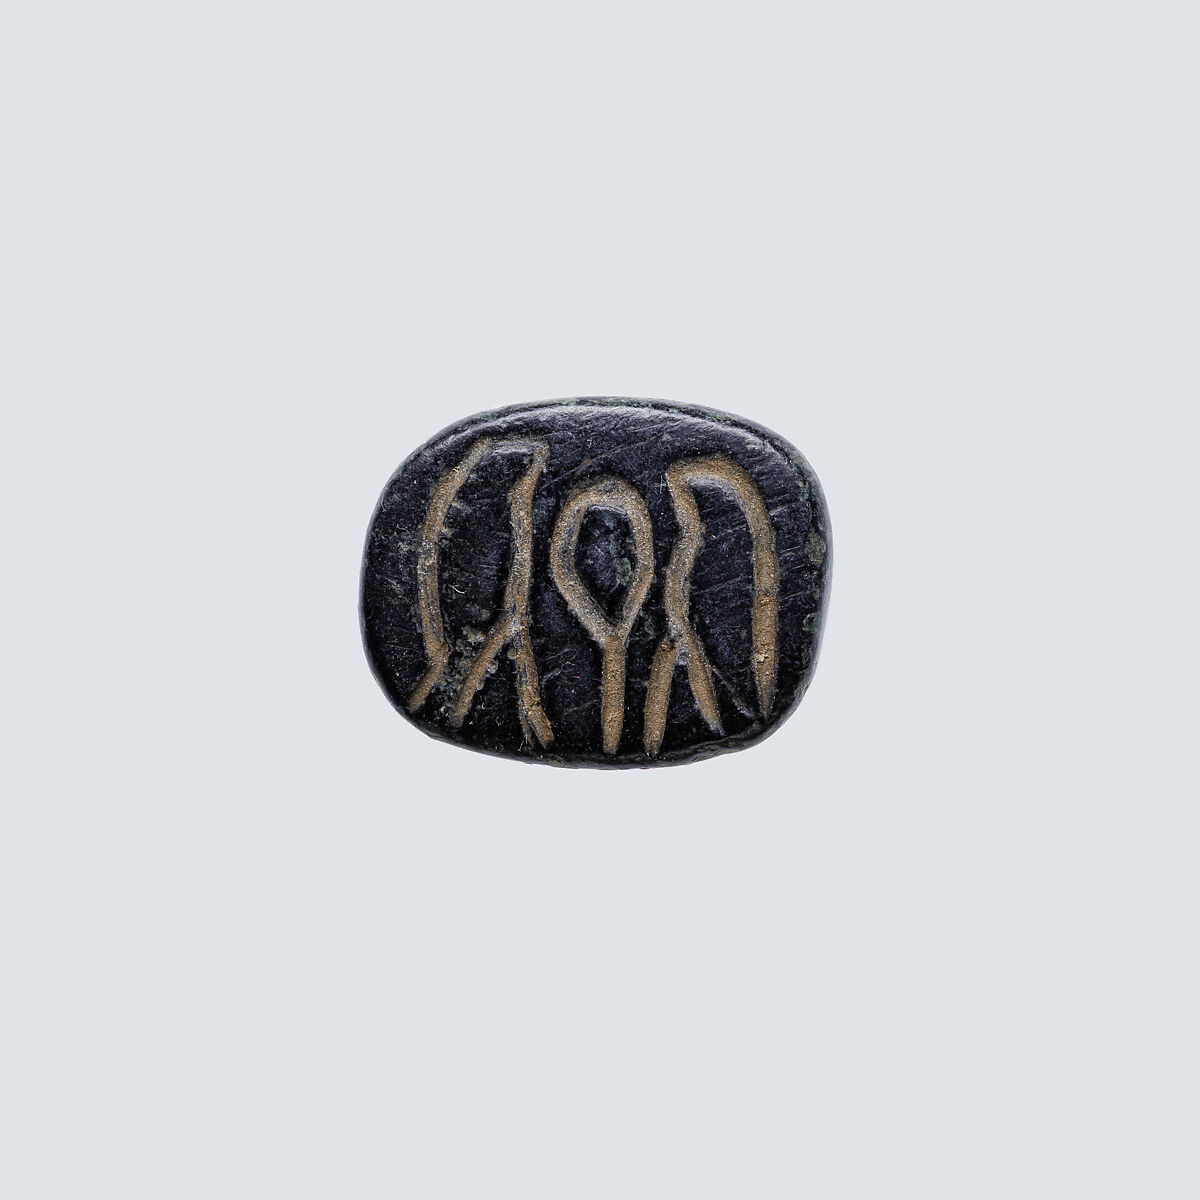 Design Amulet, Pyramidal Back with Horizontal Piercing, Device showing Two Falcons Flanking what is meant to be an Ankh Sign, Serpentinite 